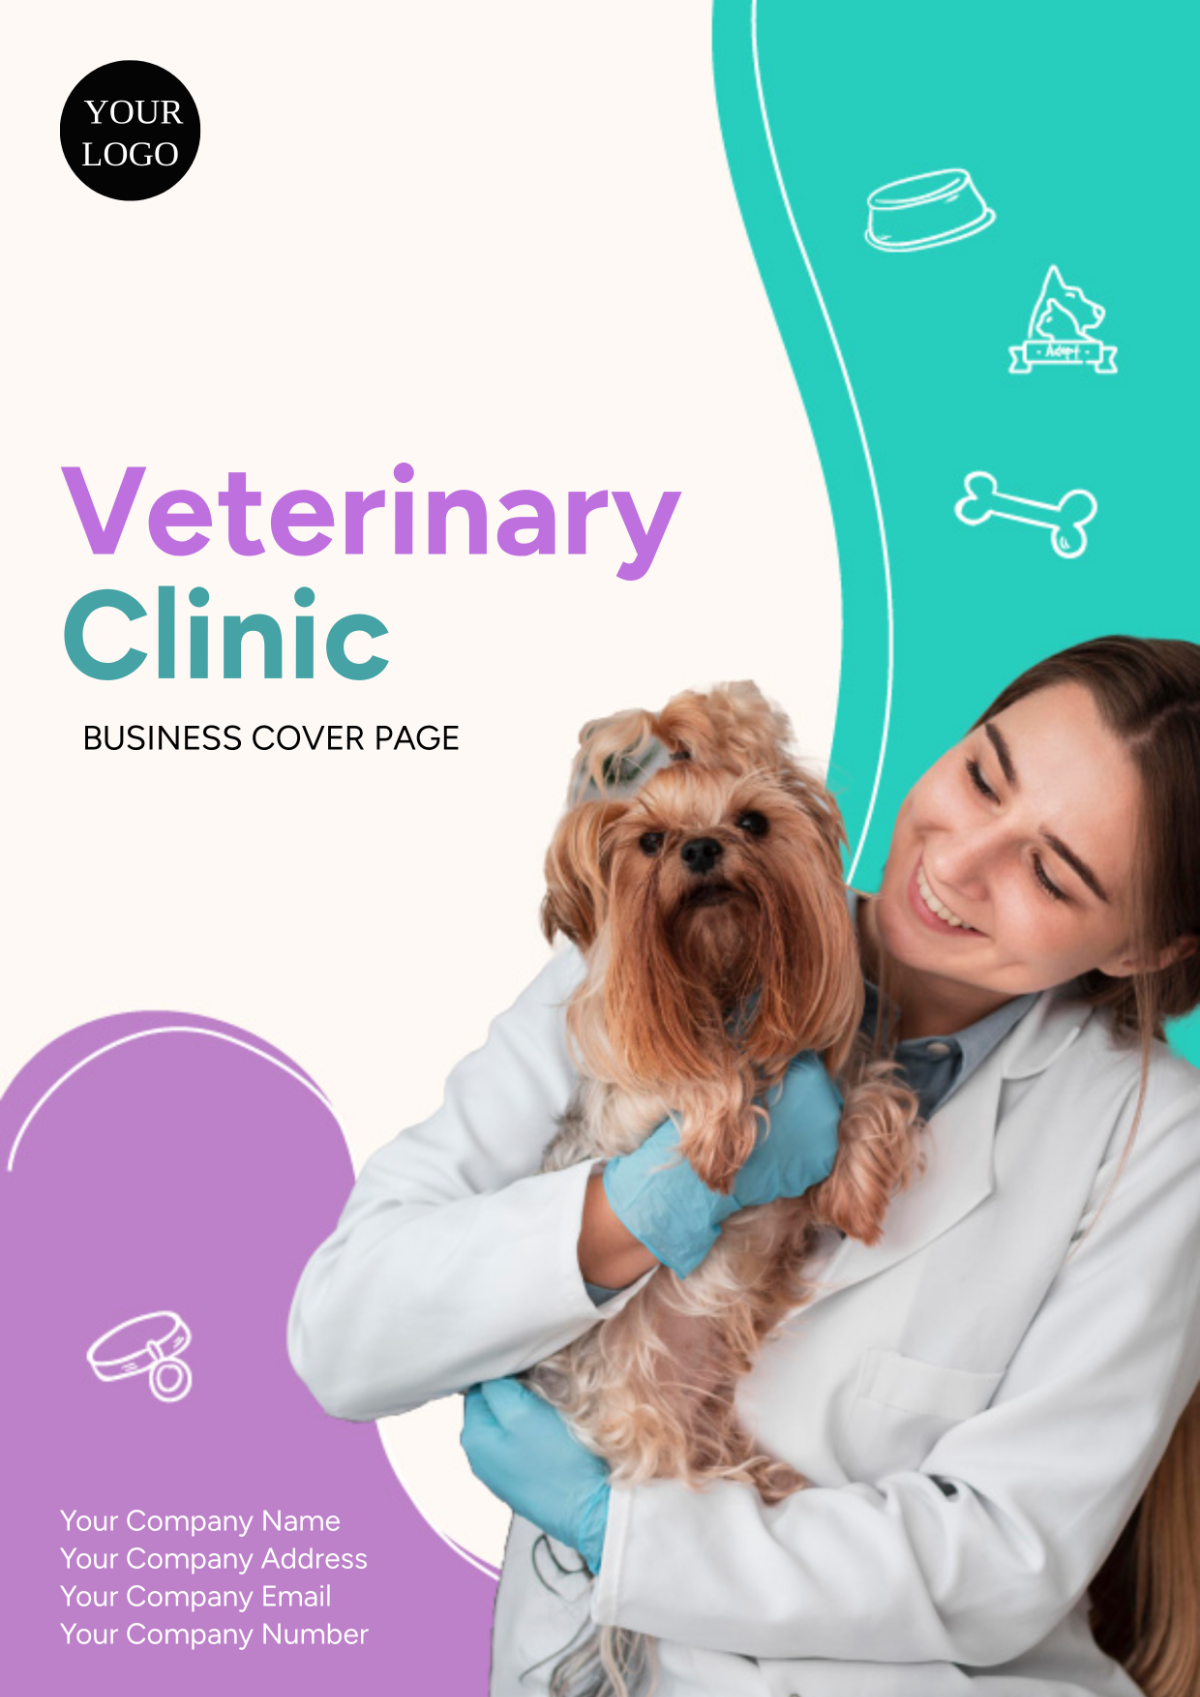 Veterinary Clinic Business Cover Page